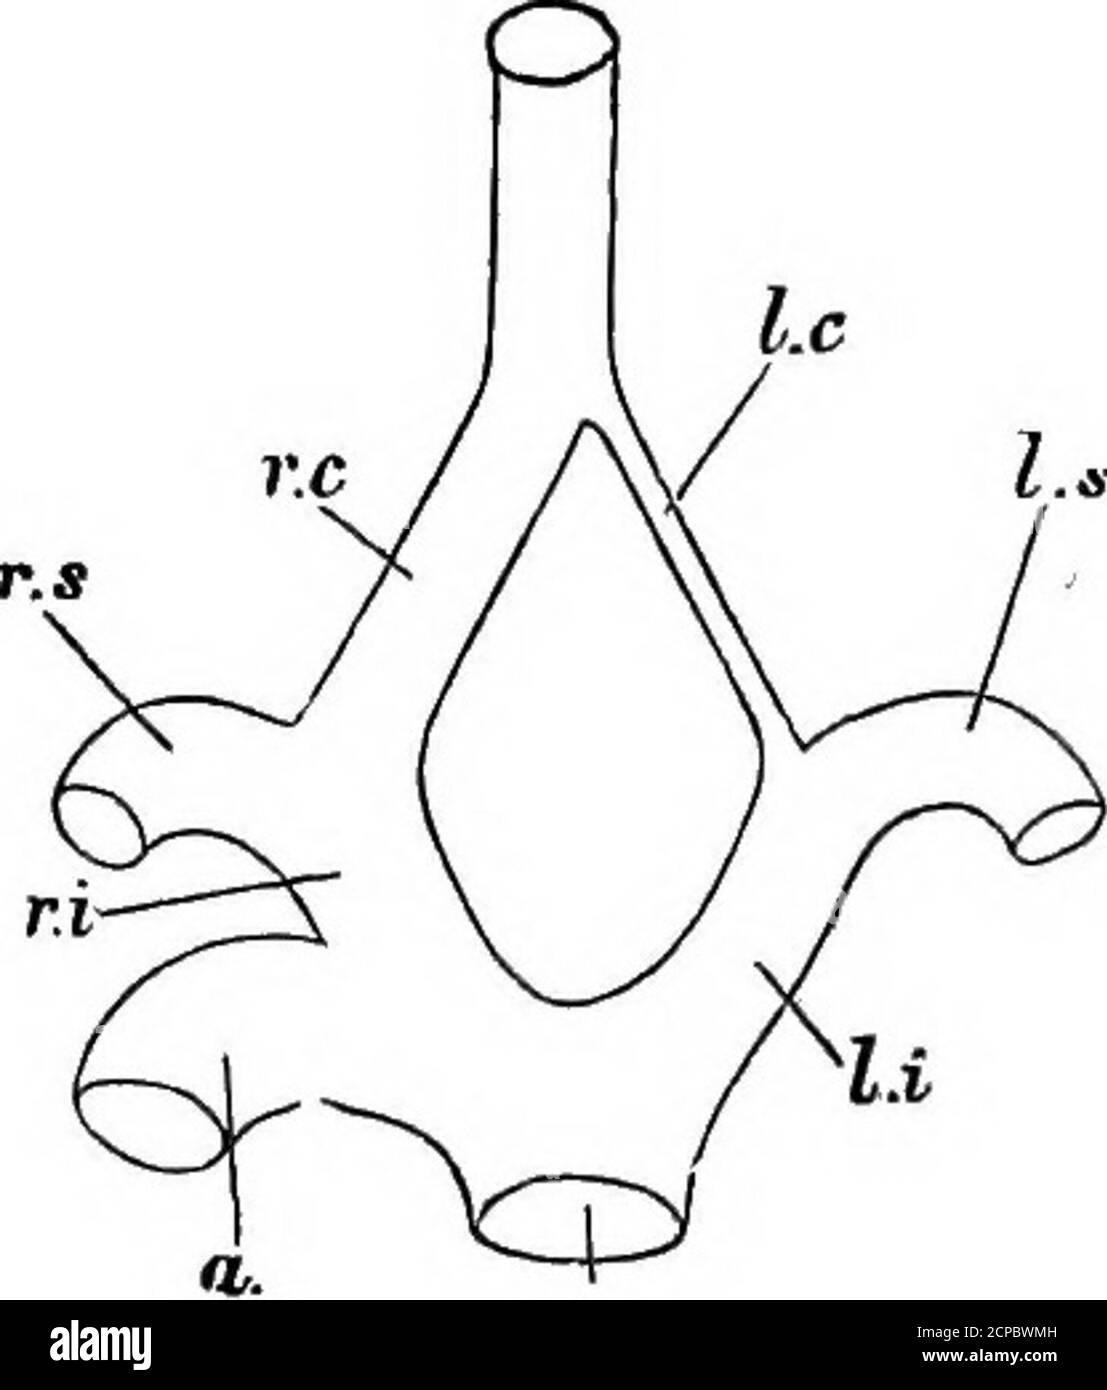 . The structure and classification of birds . Fig. 34.—Cabotids of Flamingo.Letteeing as in Fig. 32.. Fig. 35.—Cabotids op Cacatua.Letteedjo as in Fig. 32. Many writers, especially Nitzsch, among the earher anato-mists, have drawn attention to some of these variations. L. A. Neugebaueb, Systema Venosum- Avium, Nov. Act. Acad. Nat. Cv/r.xxi. 1845, p. 517; Bathke, Ober die Carotiden . . der Vogel, Arch. f. Anat. u.Phya. 1850, p. 184, and Bemerk. iiber die Entstehung, &o., der gemeinsoh.Carotis, ibid. 1858, p. 315 ; Gabbod, On the Carotid Arteries of Birds, P. Z. S.1873, p. 457 ; C. H. Wade, Note Stock Photo